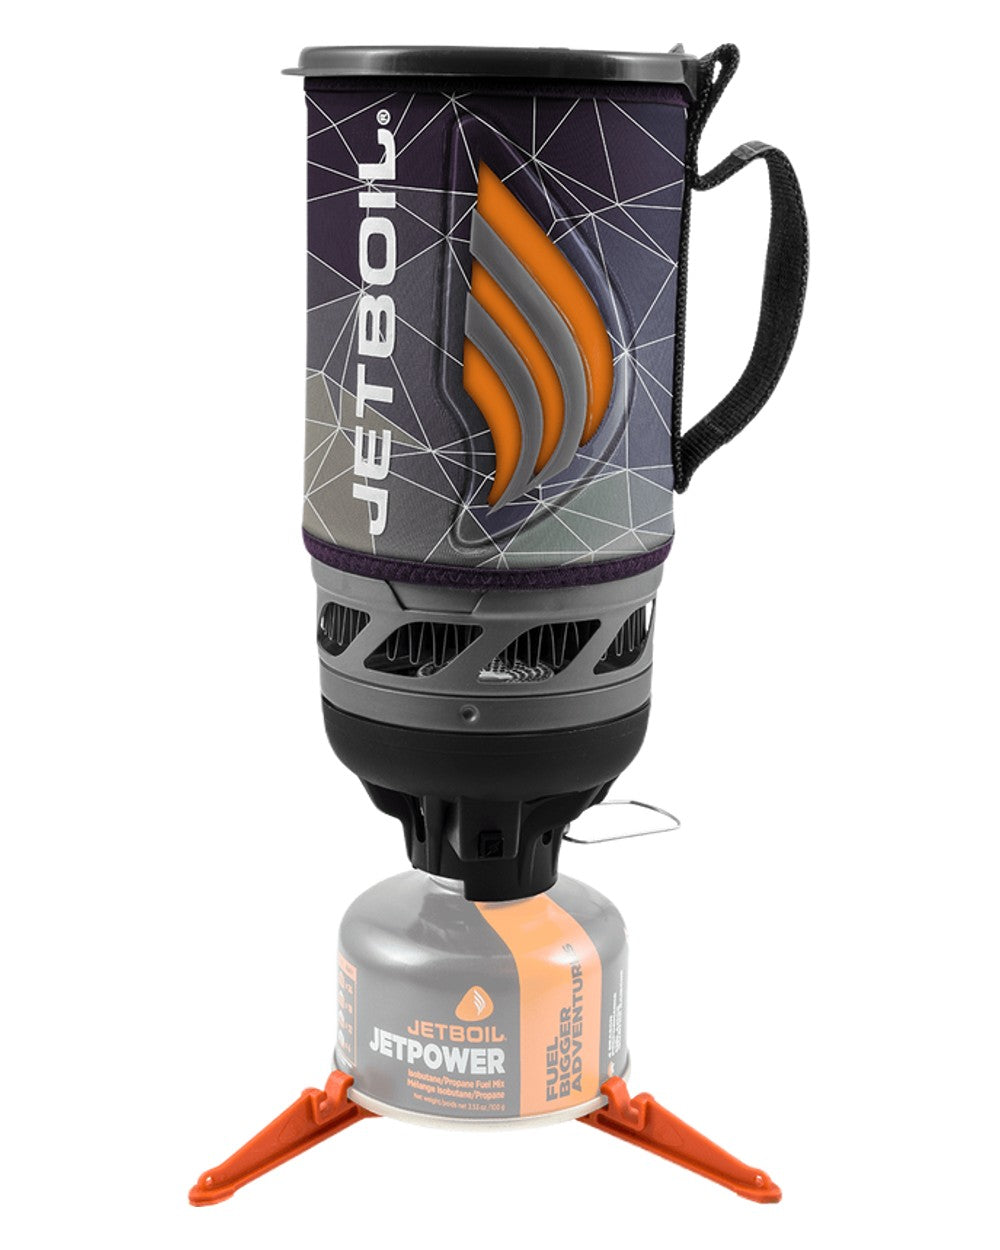 Jetboil Flash Personal Cooking System In Fractile 